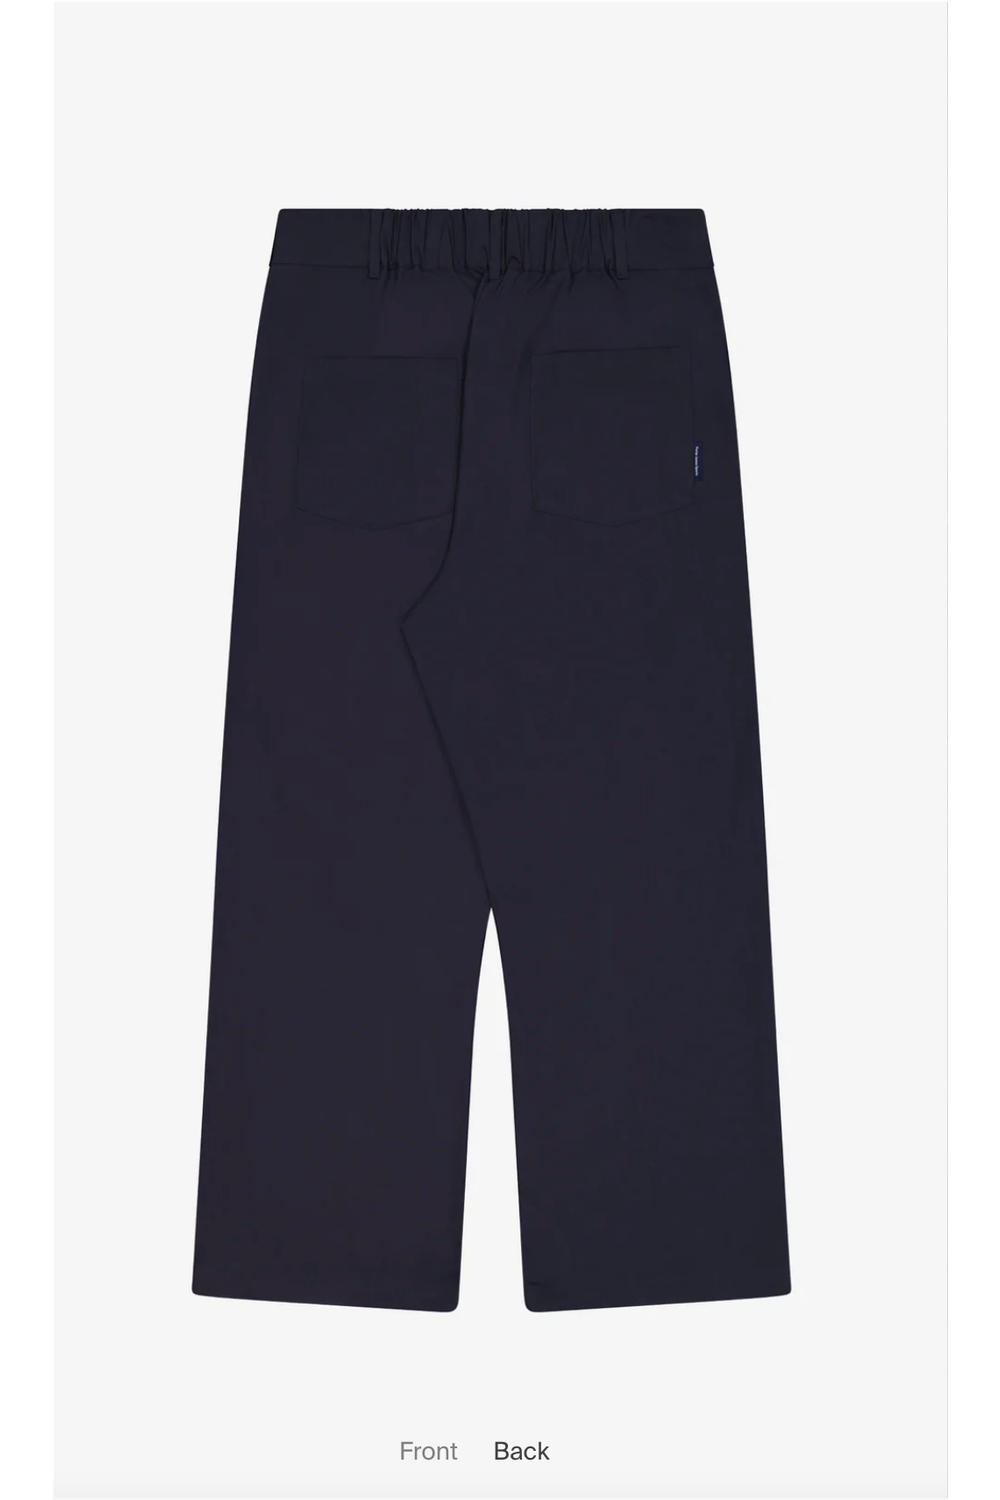 PLEATED PORTER PANT NAVY | PORTER JAMES SPORTS | Mad About The Boy